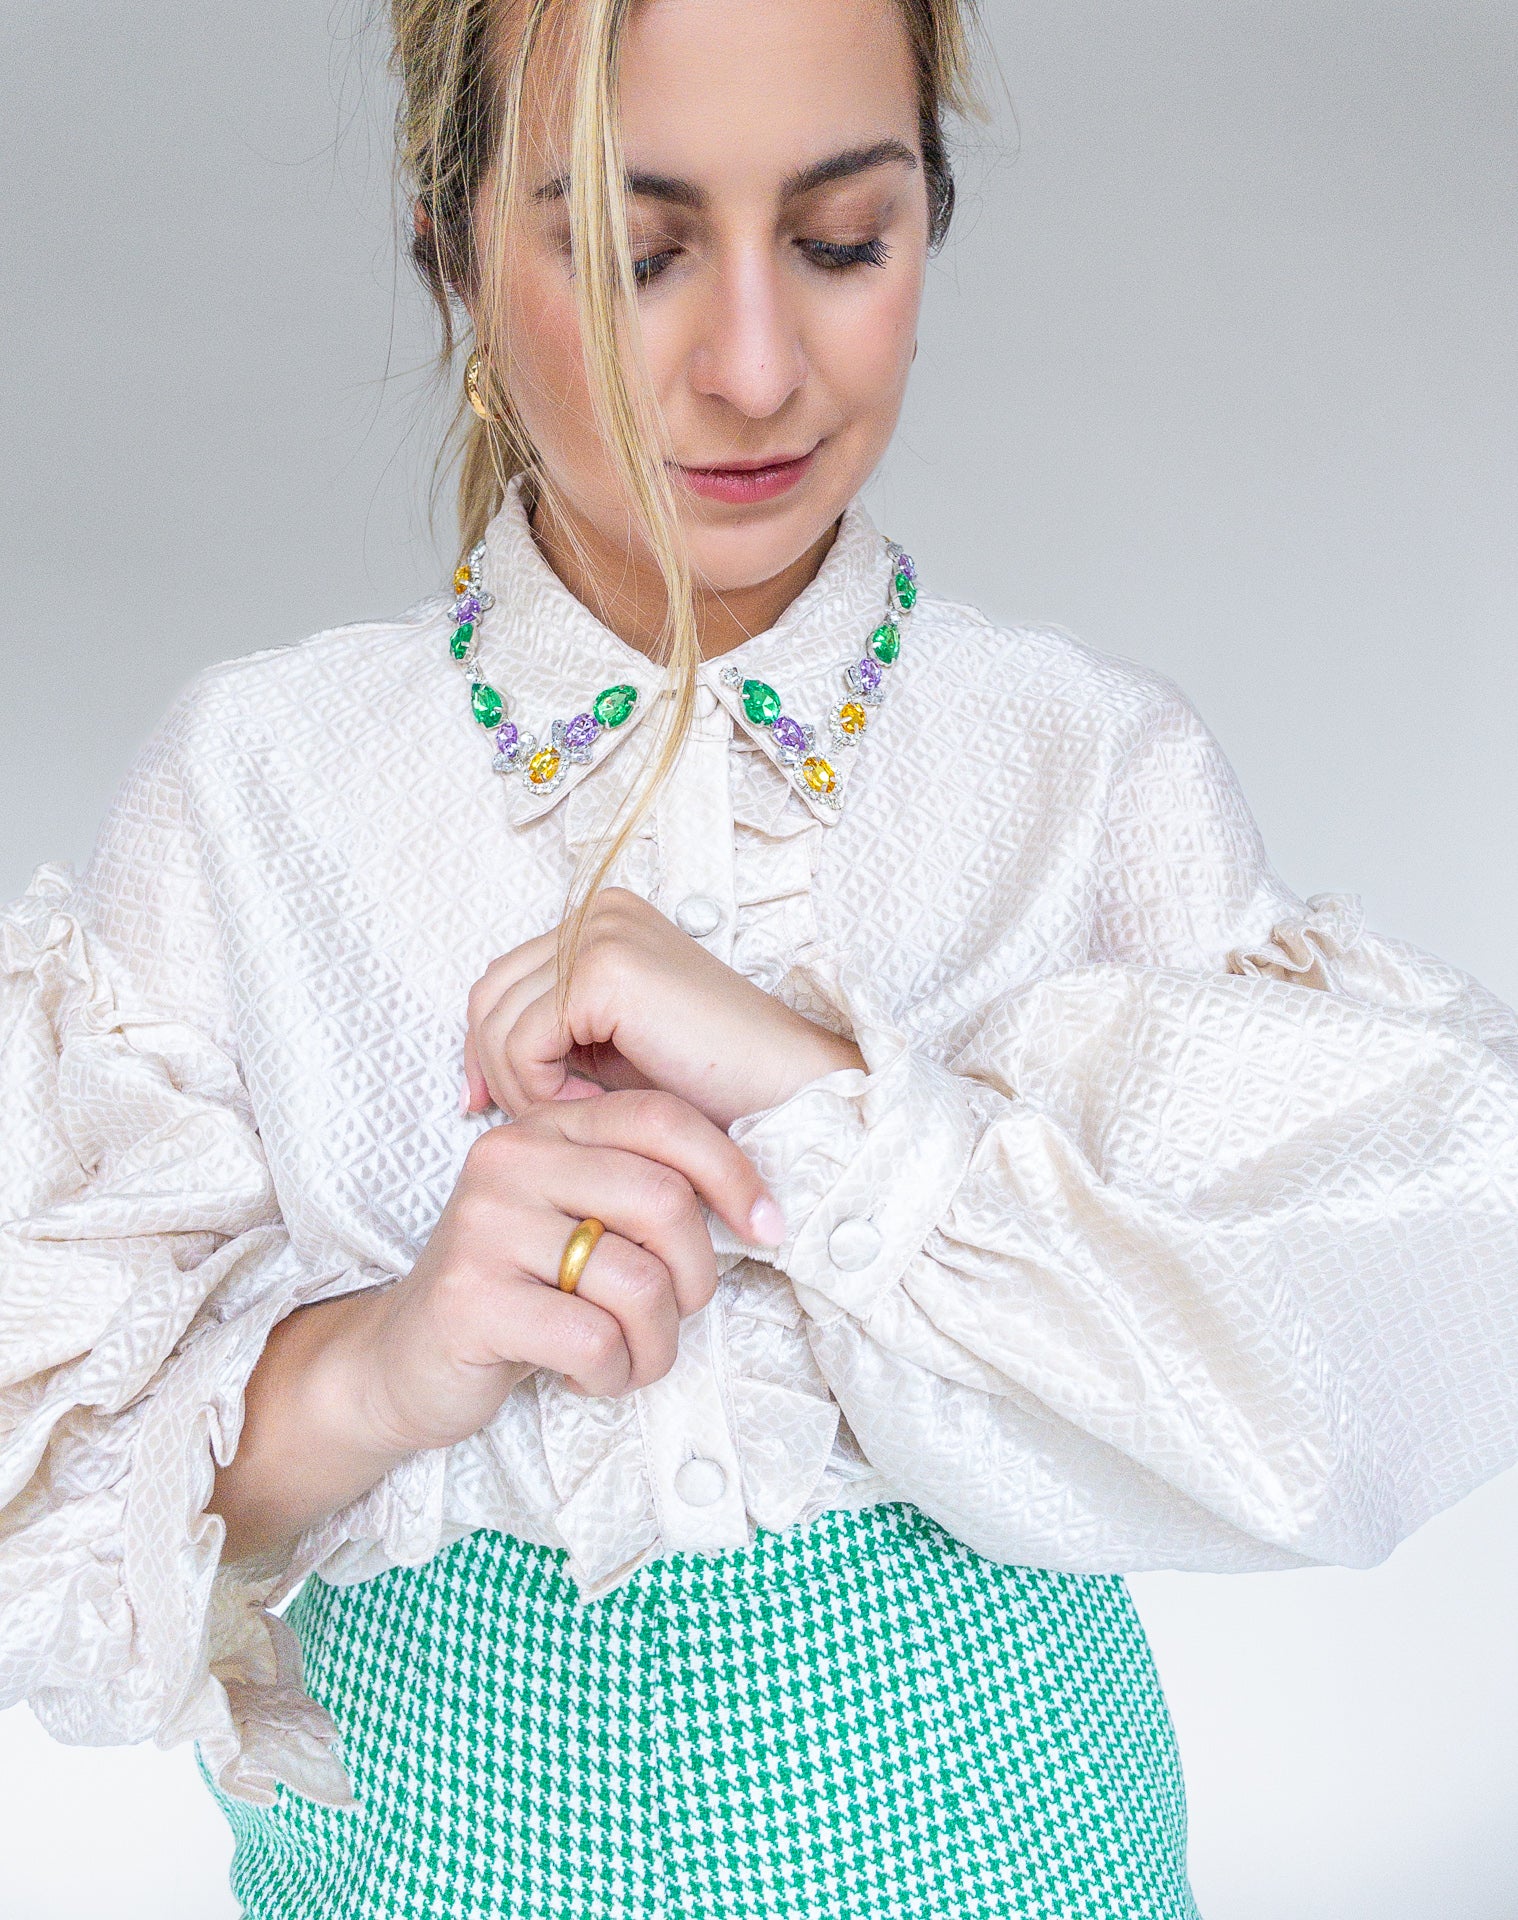 sister jane, lady jewel collar shirt, jewel collar, women's blouse, fashion, apparel, ethically made, slow fashion, curate, shopthecurate